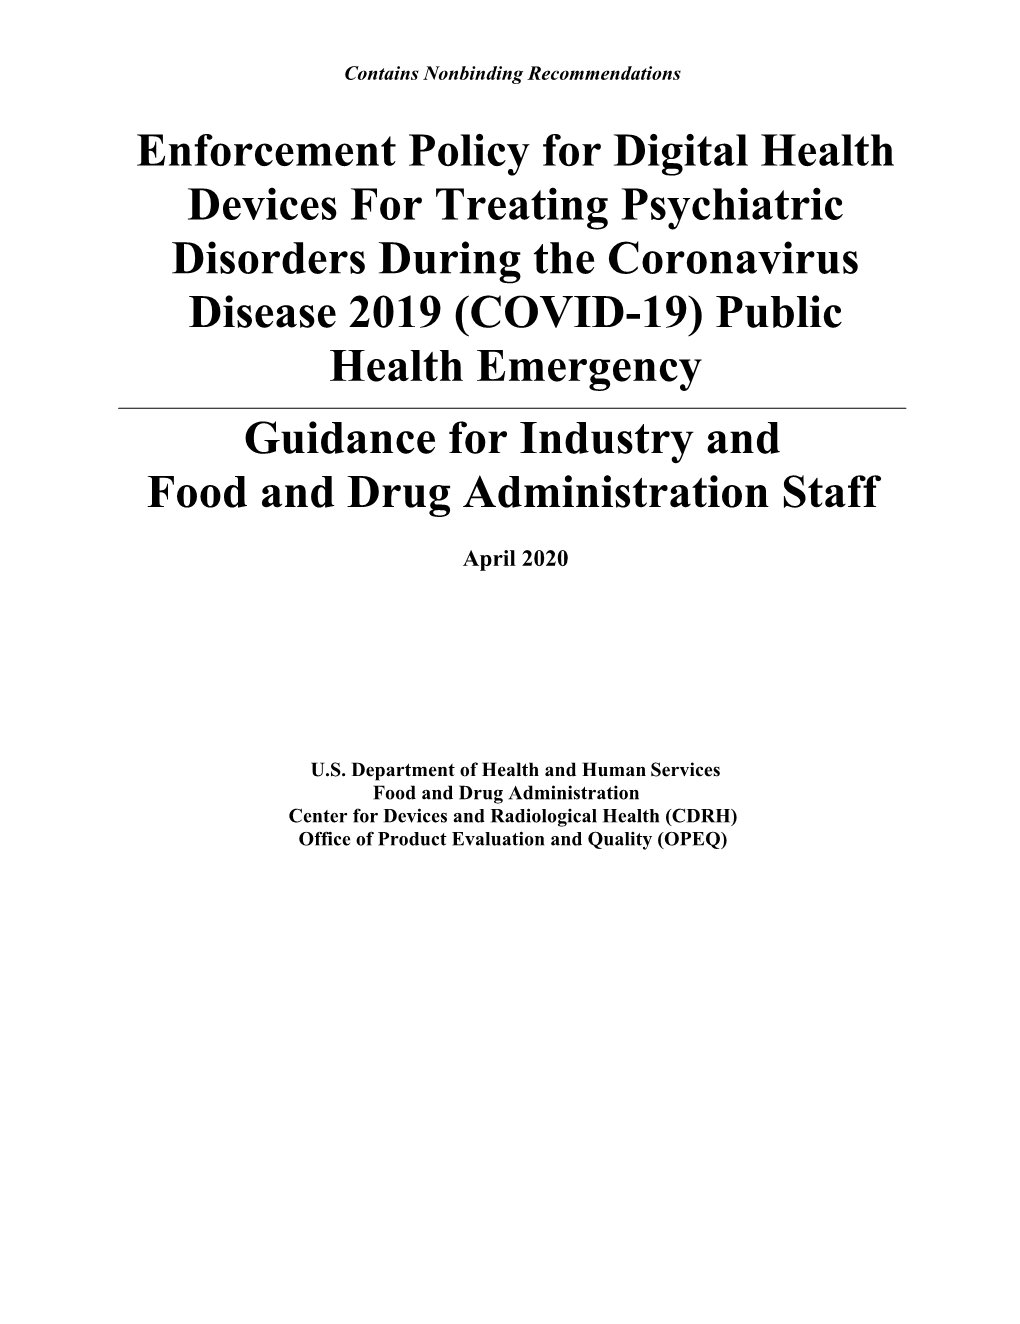 Digital Health Devices for Treating Psychiatric Disorders